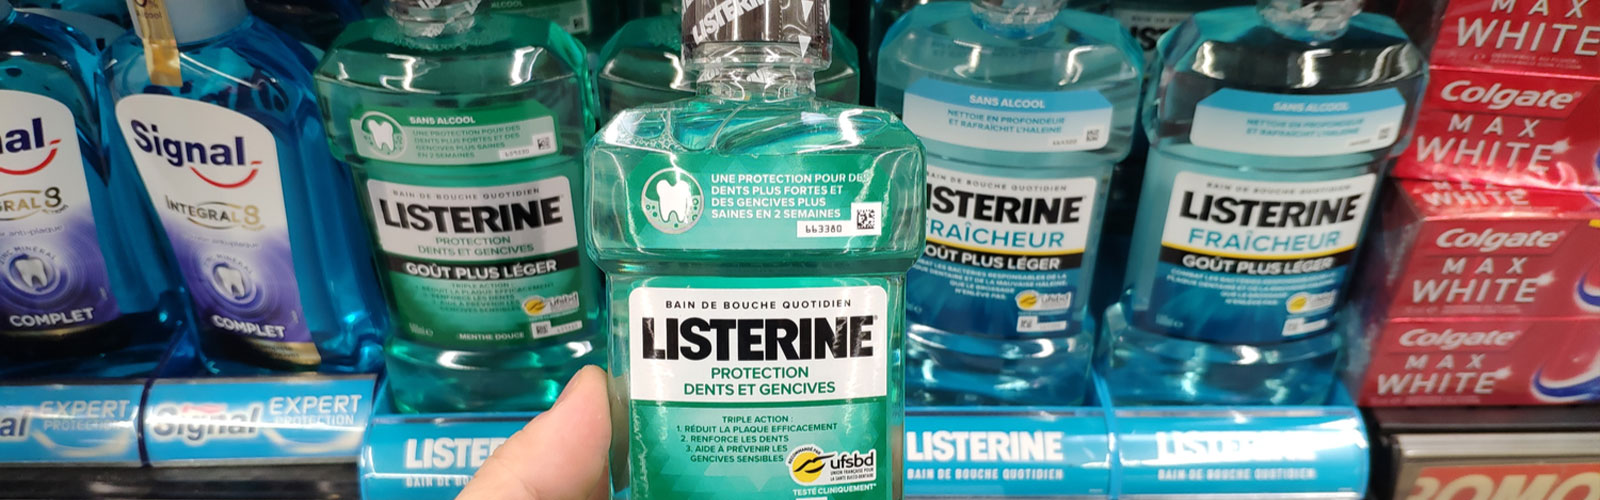 The Effect Mouthwash Has on COVID-19 Requires Context